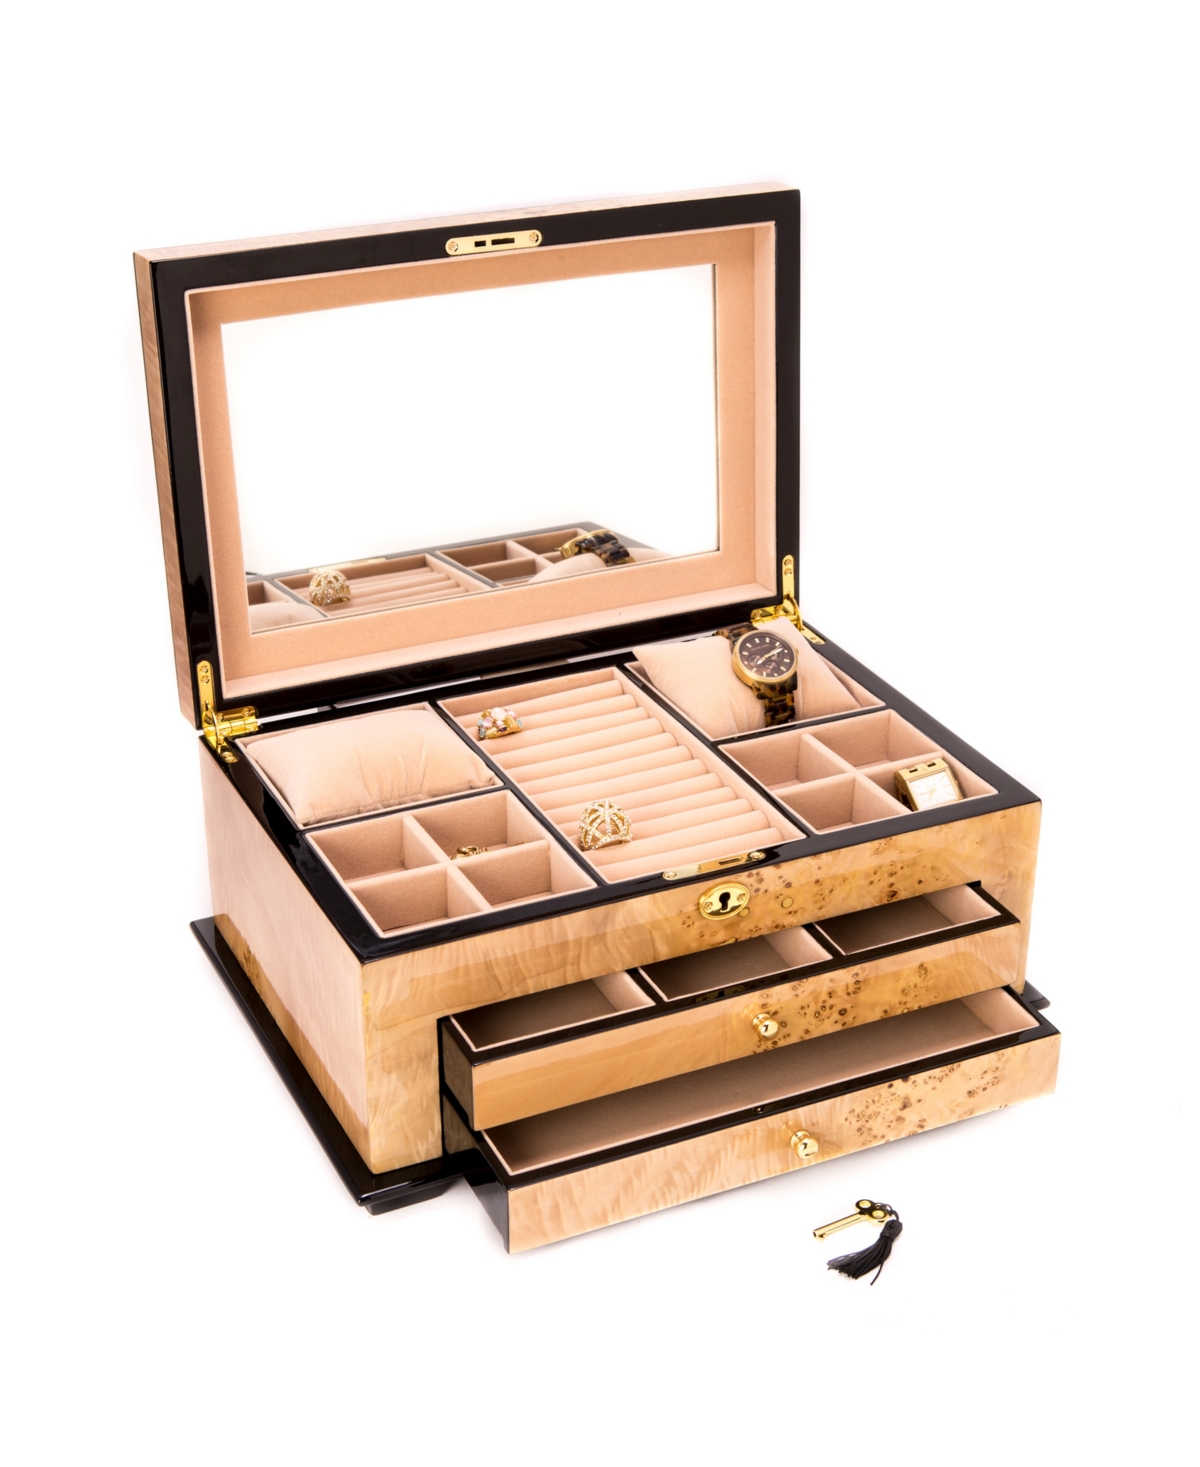 Birdseye Maple 3 Level Jewelry Box with Gold tone Accents and Locking Lid - Multi